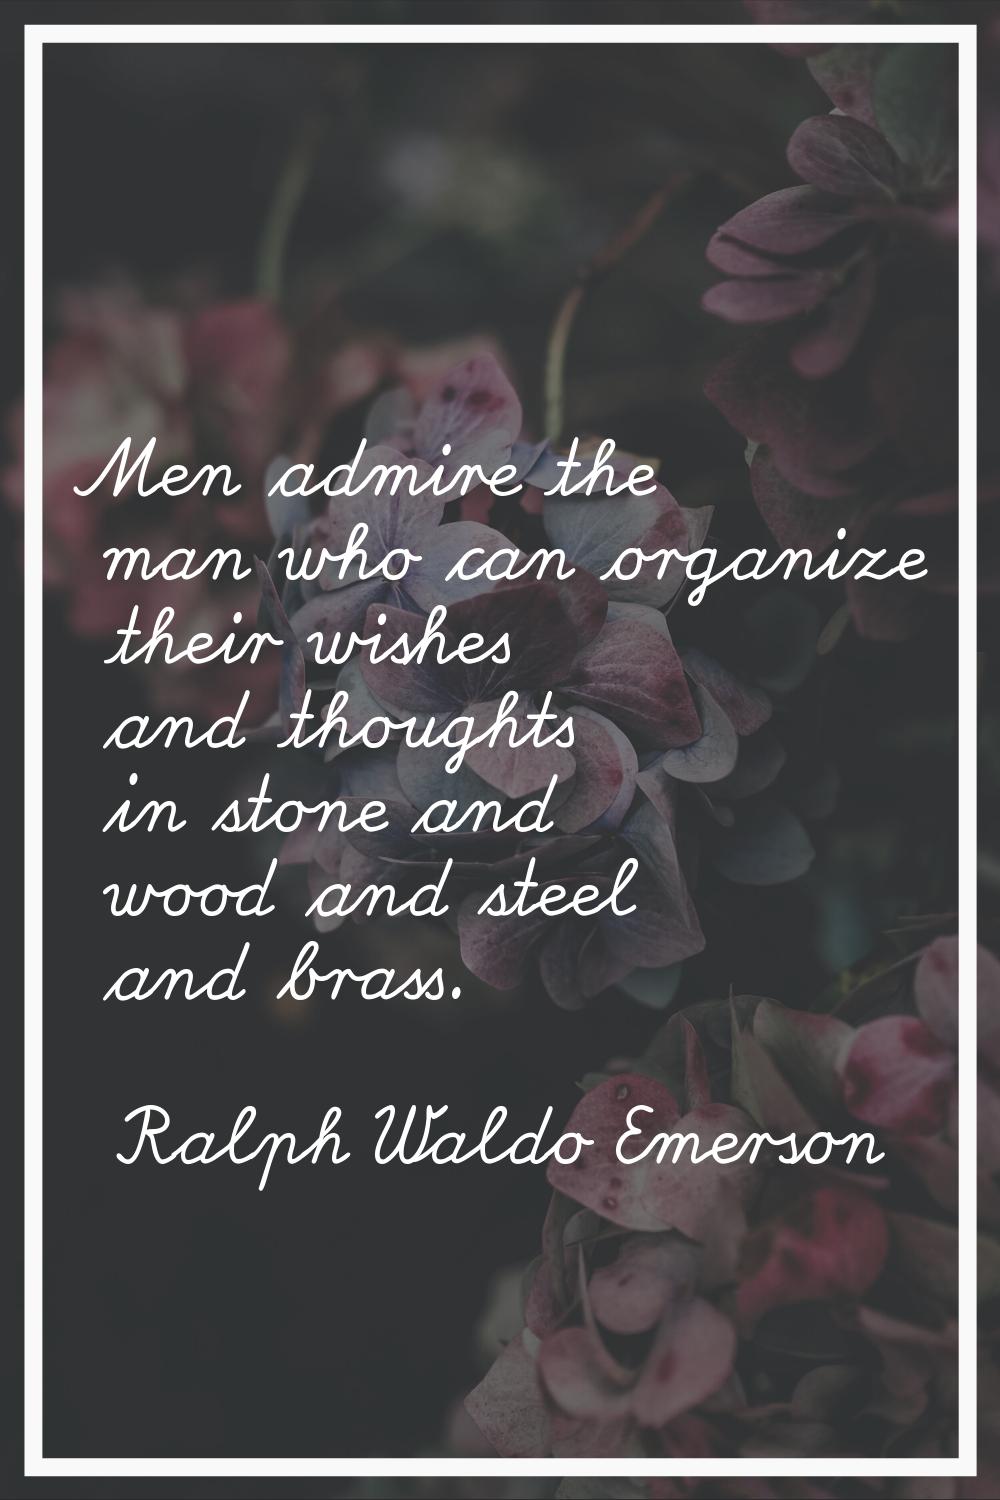 Men admire the man who can organize their wishes and thoughts in stone and wood and steel and brass